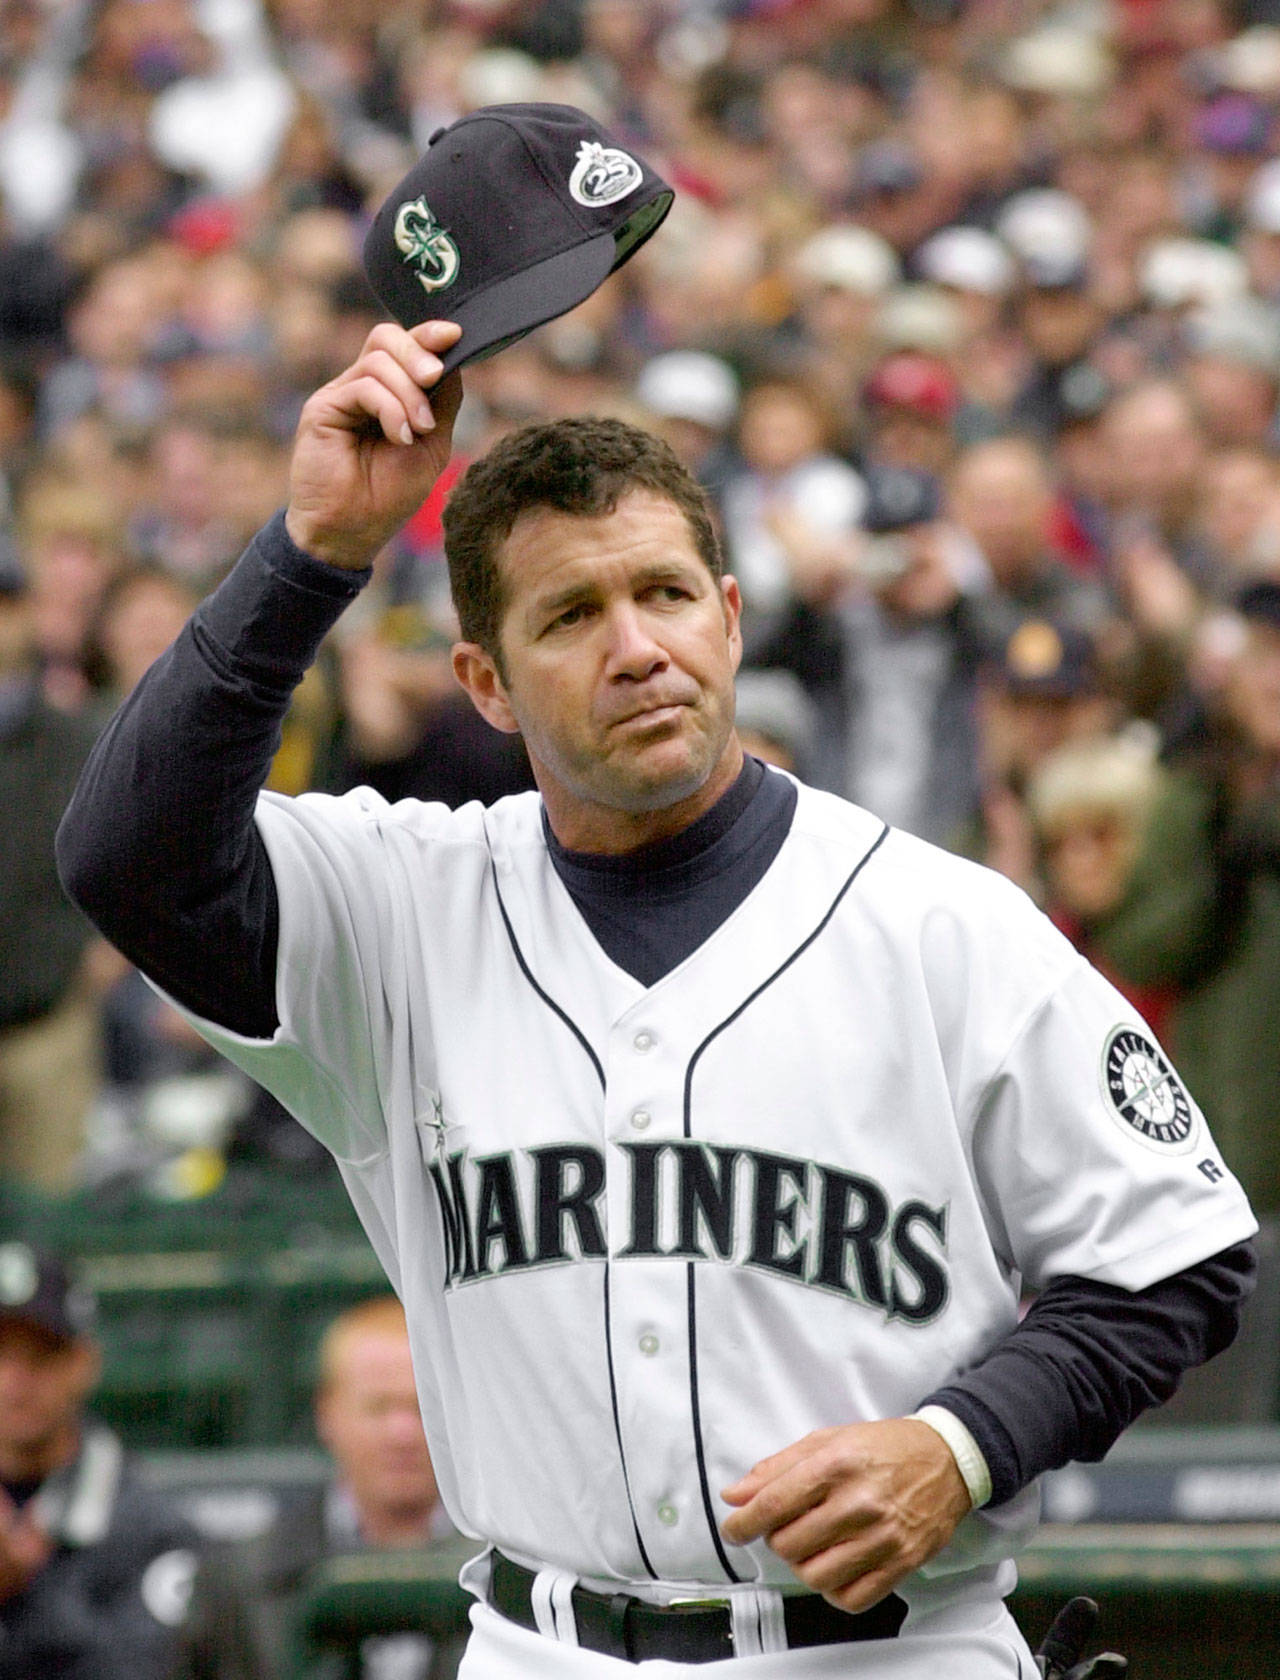 Edgar Martinez tips his cap to the crowd as he is introduced on Opening Day in 2002. Martinez spent his entire 18-year major-league career with the Mariners. (AP Photo/Elaine Thompson)